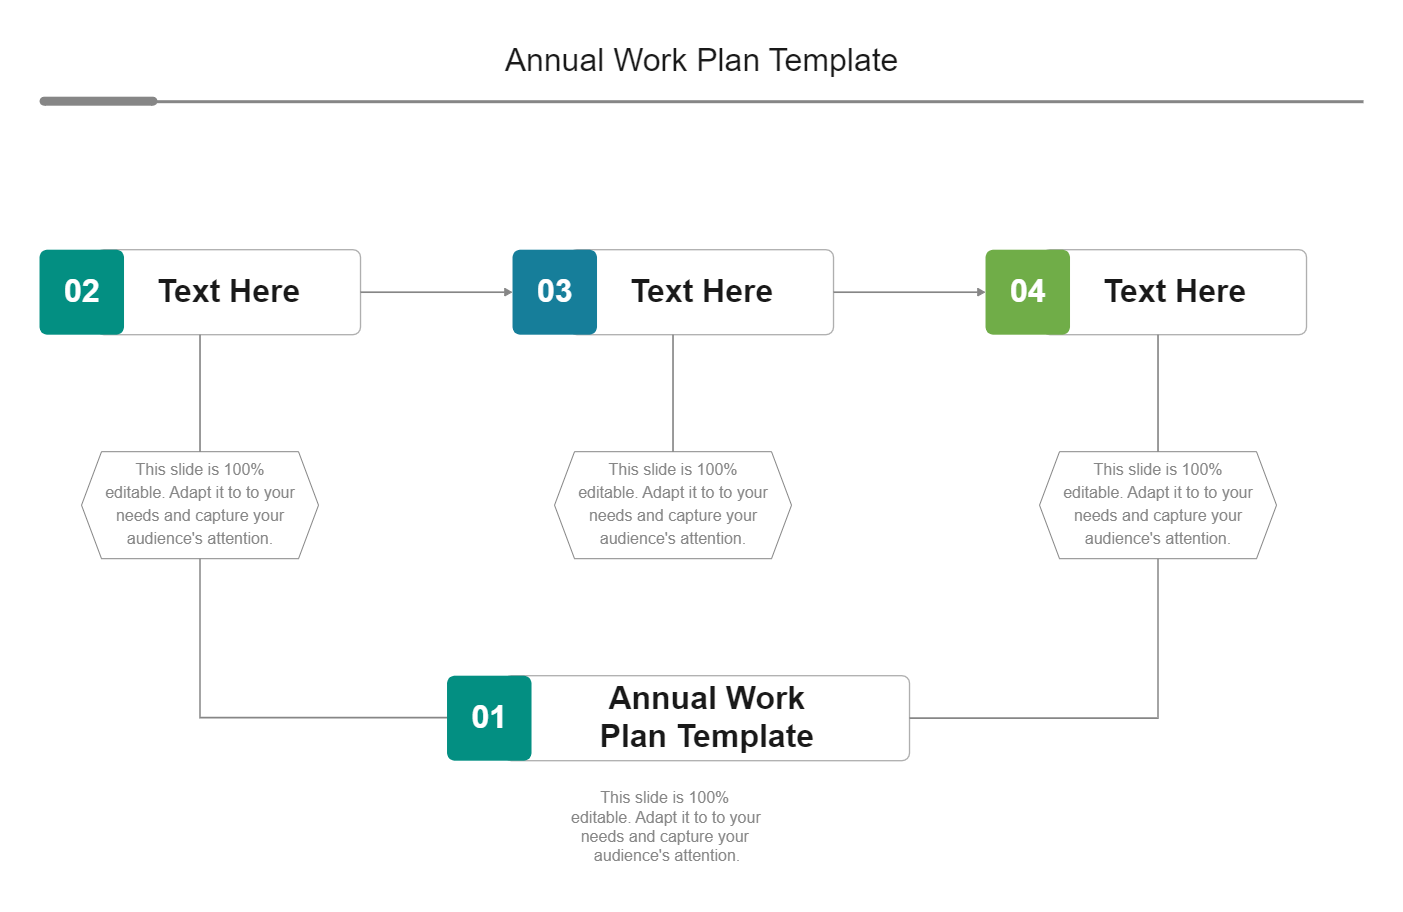 Annual Work Plan Online Examples